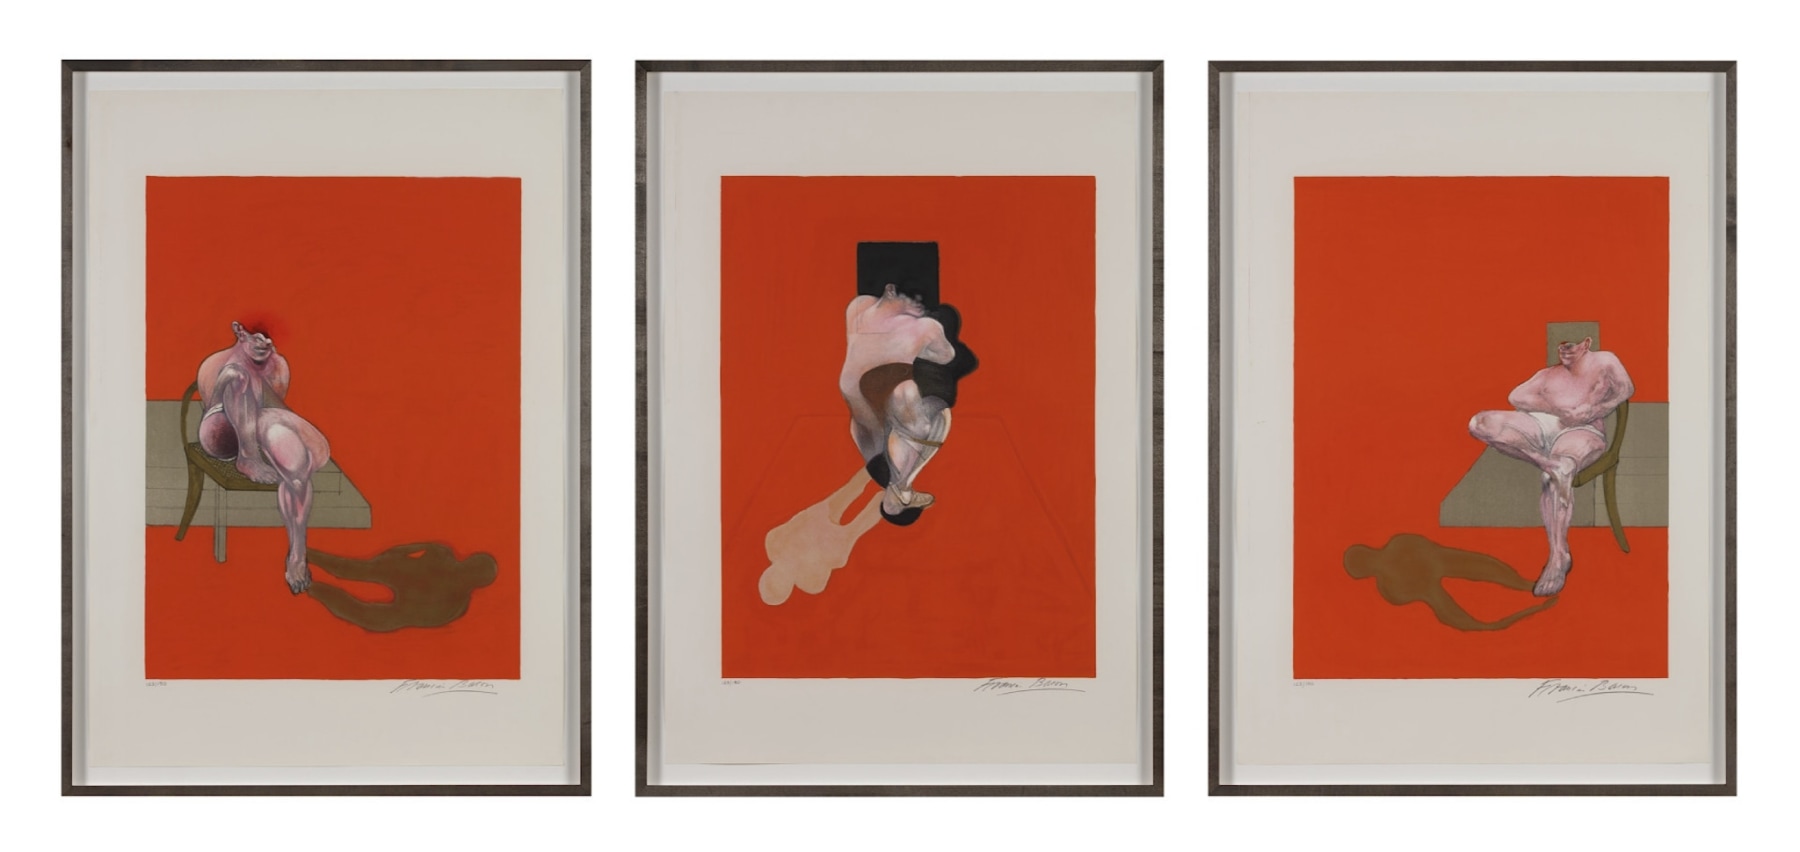 Francis Bacon
Triptych 1983, 1984

a set of 3 lithographs, ed. of 180

image: each 26 x 19 1/2 in. / 66 x 49.5 cm

sheet: each 35 x 24 1/2 in. / 88.9 x 62.2 cm